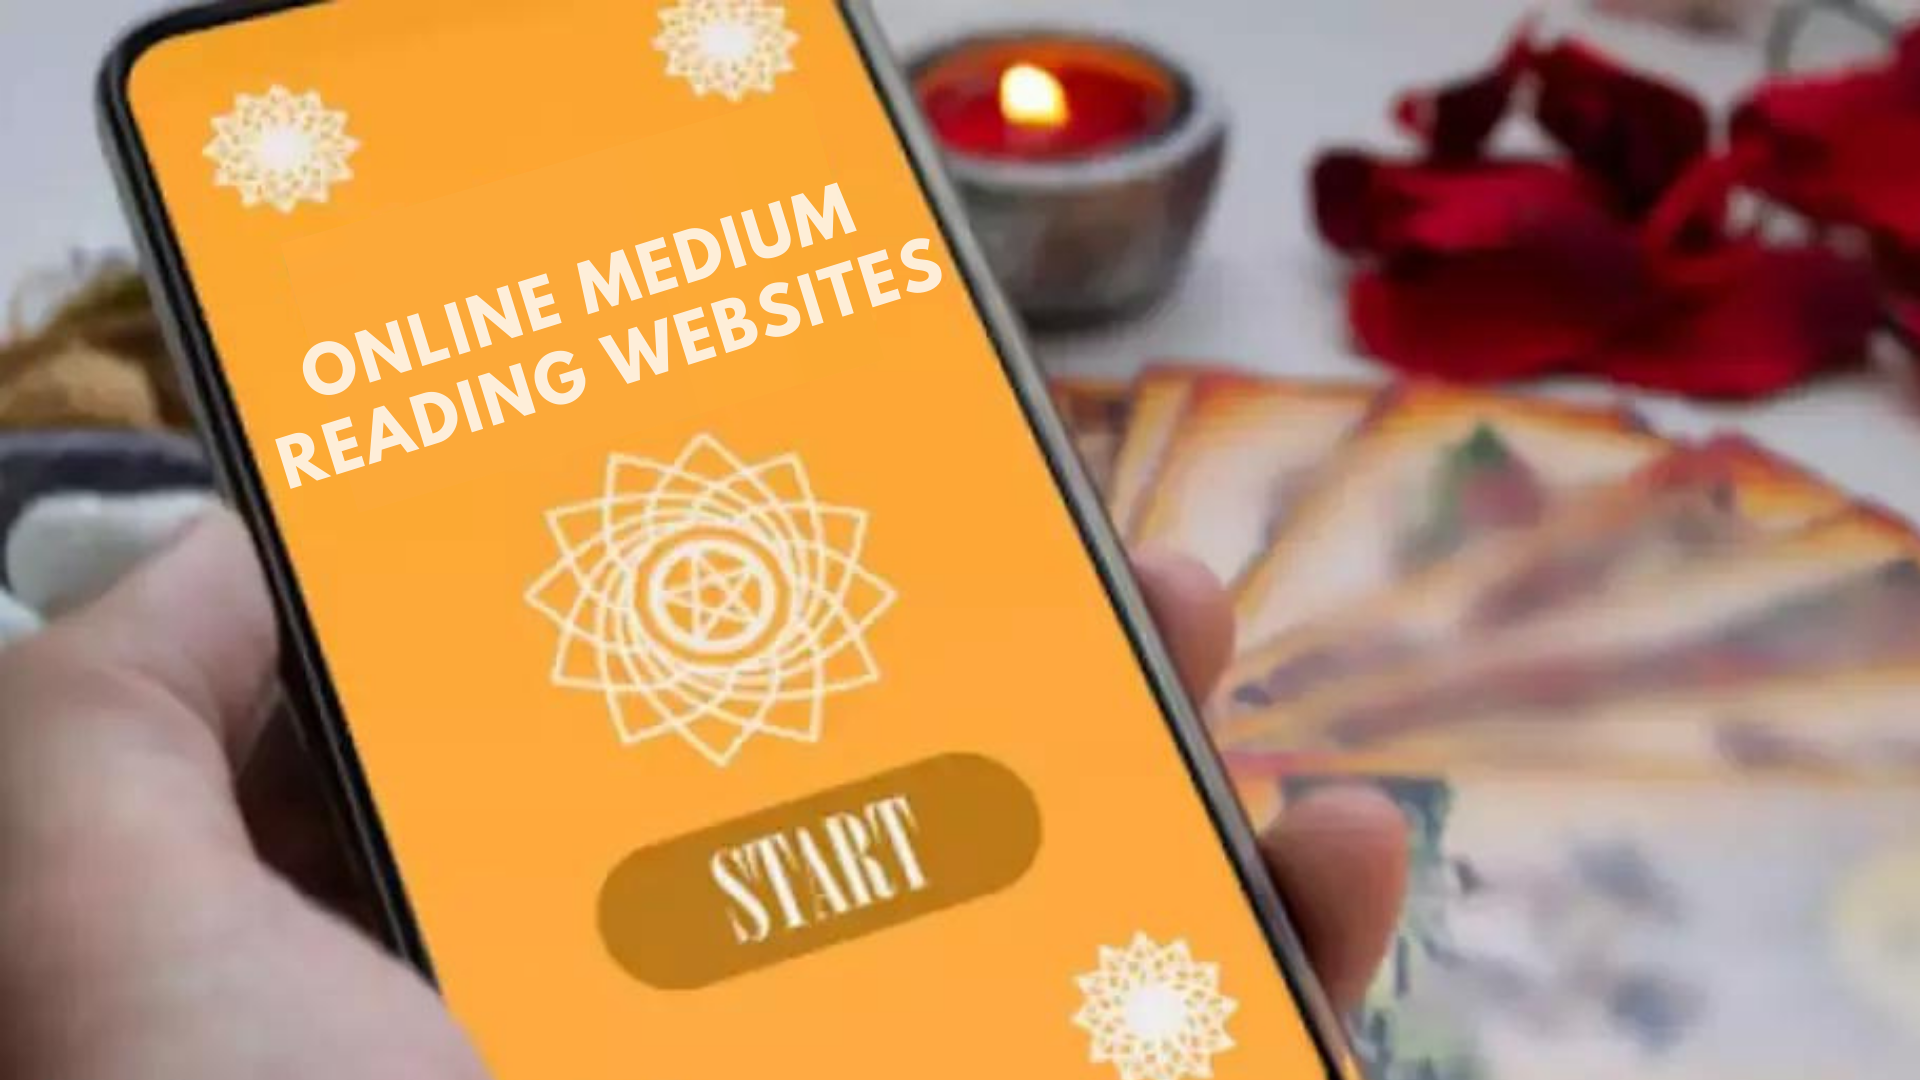 Online Medium Reading Websites For Free And Accurate Readings